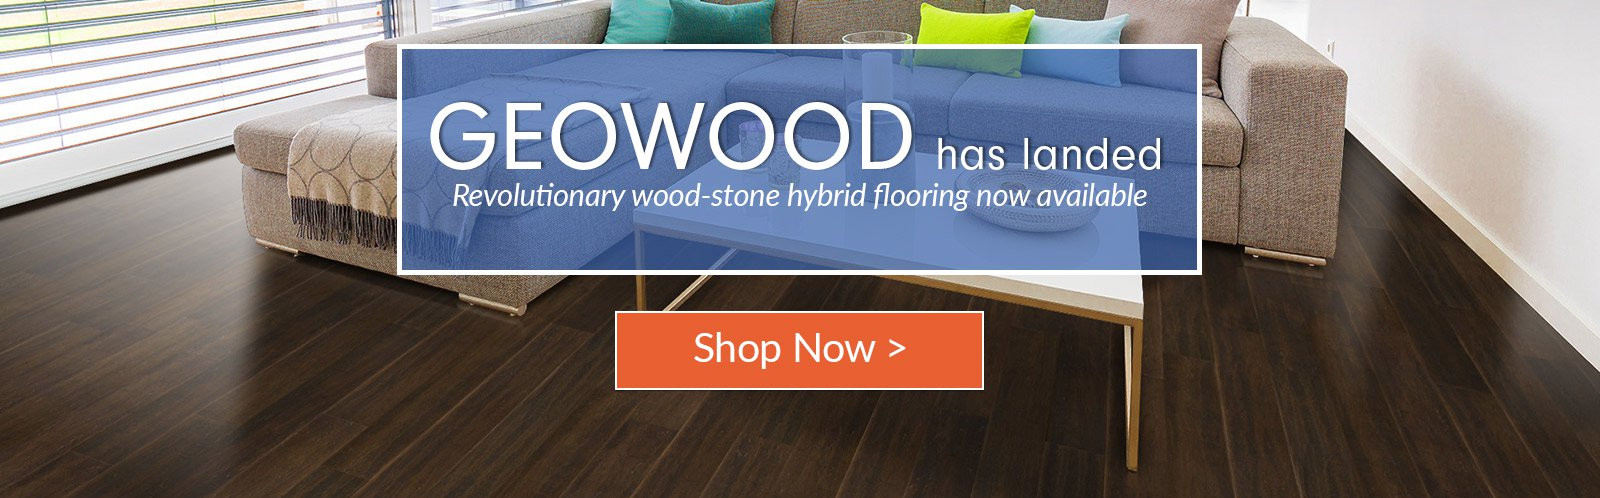 18 Nice Hardwood Flooring Contractors Seattle 2024 free download hardwood flooring contractors seattle of green building construction materials and home decor cali bamboo for geowood launch homepage slider